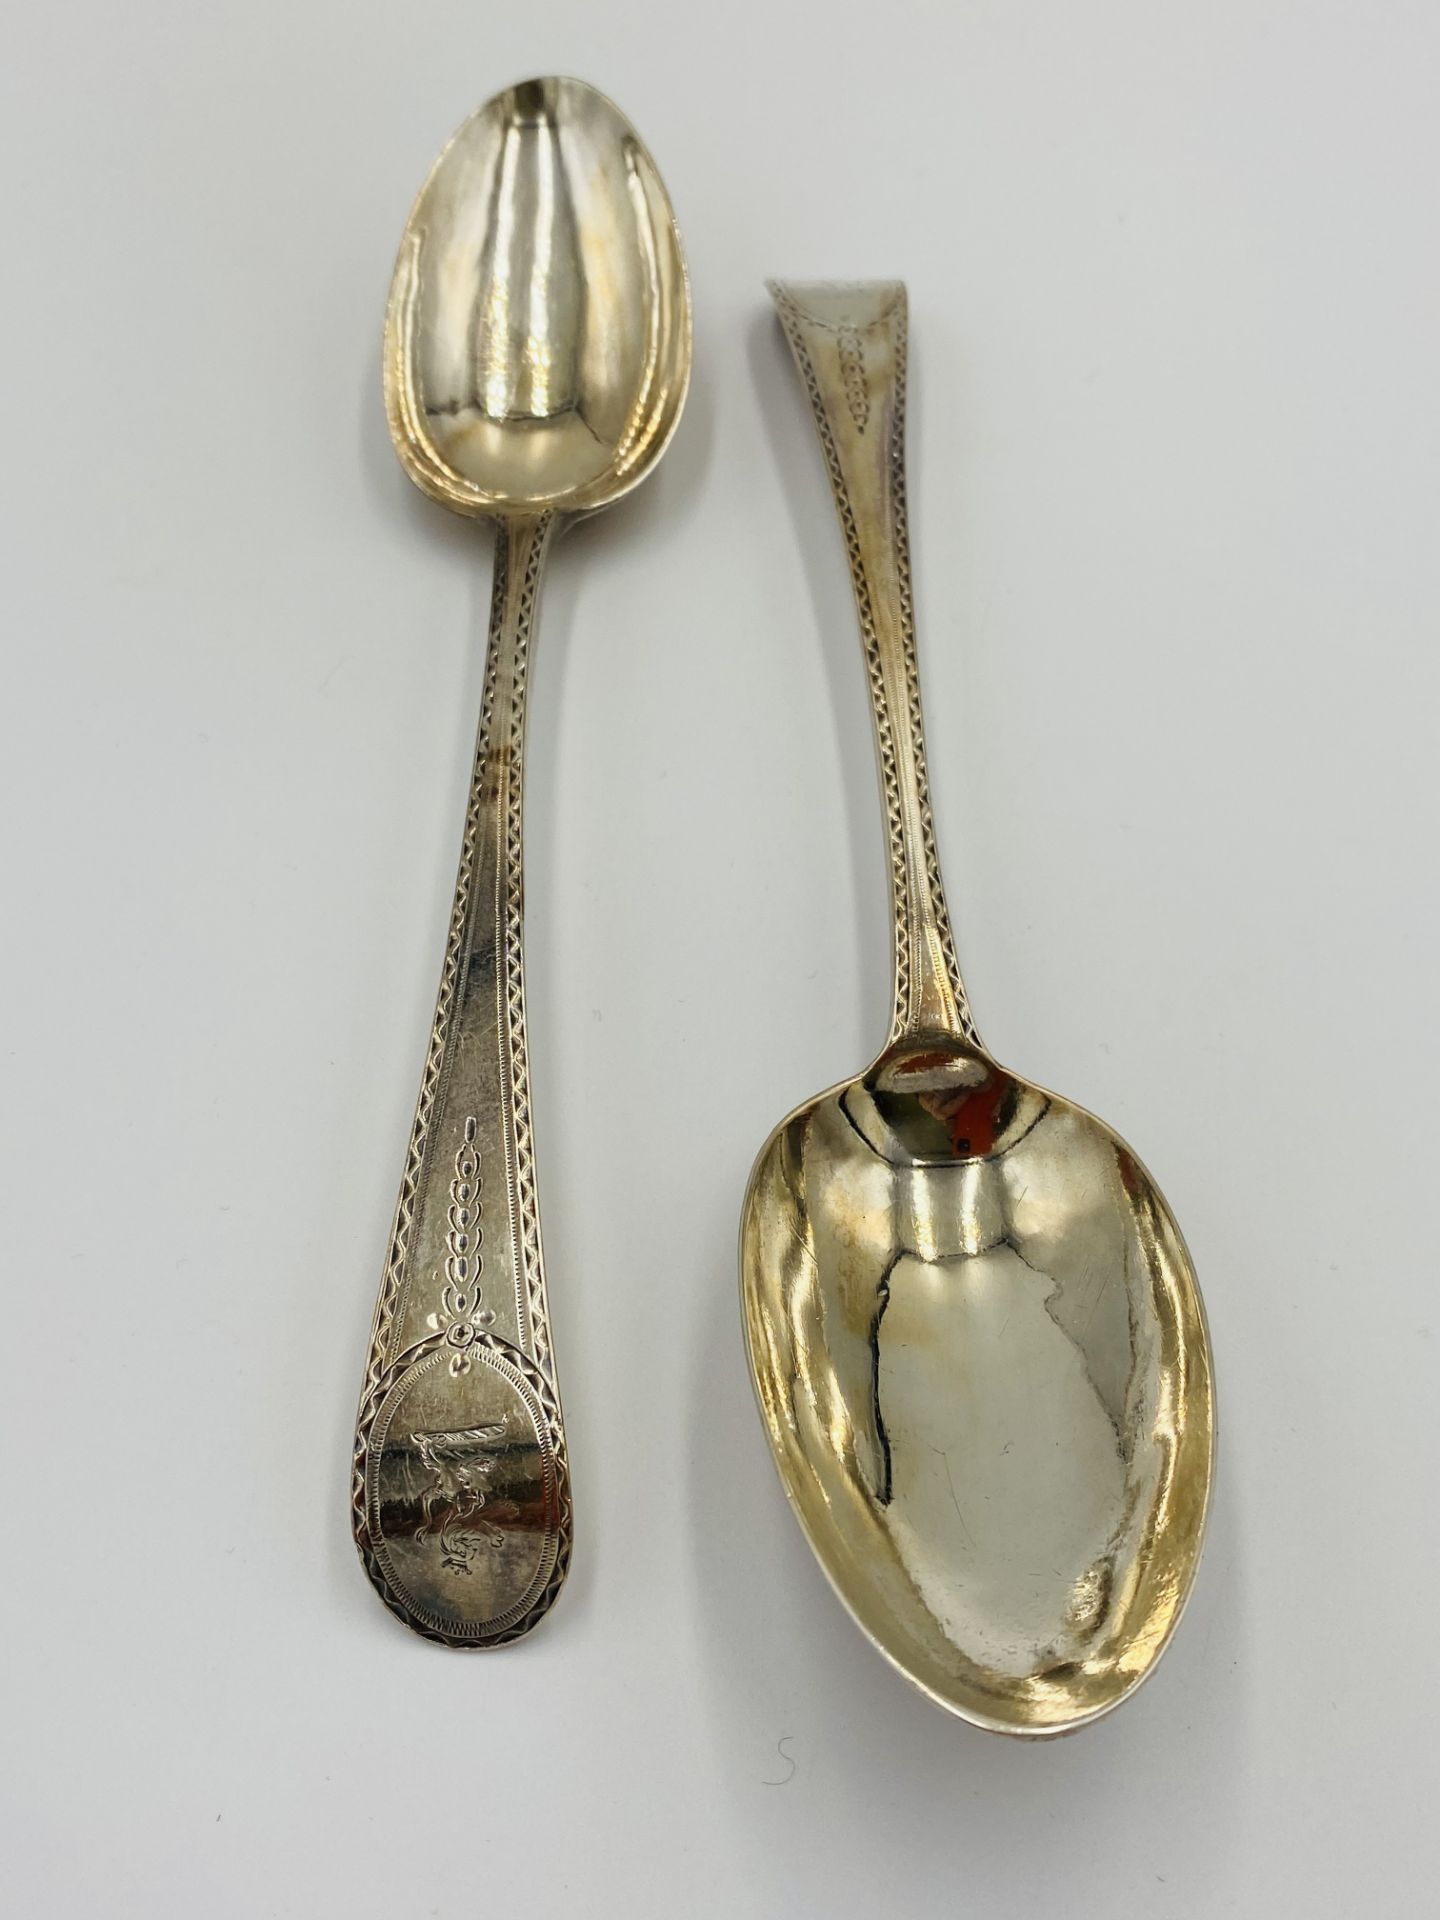 A pair of mid 18th century silver Old English pattern table spoons by Hester Bateman - Image 3 of 6